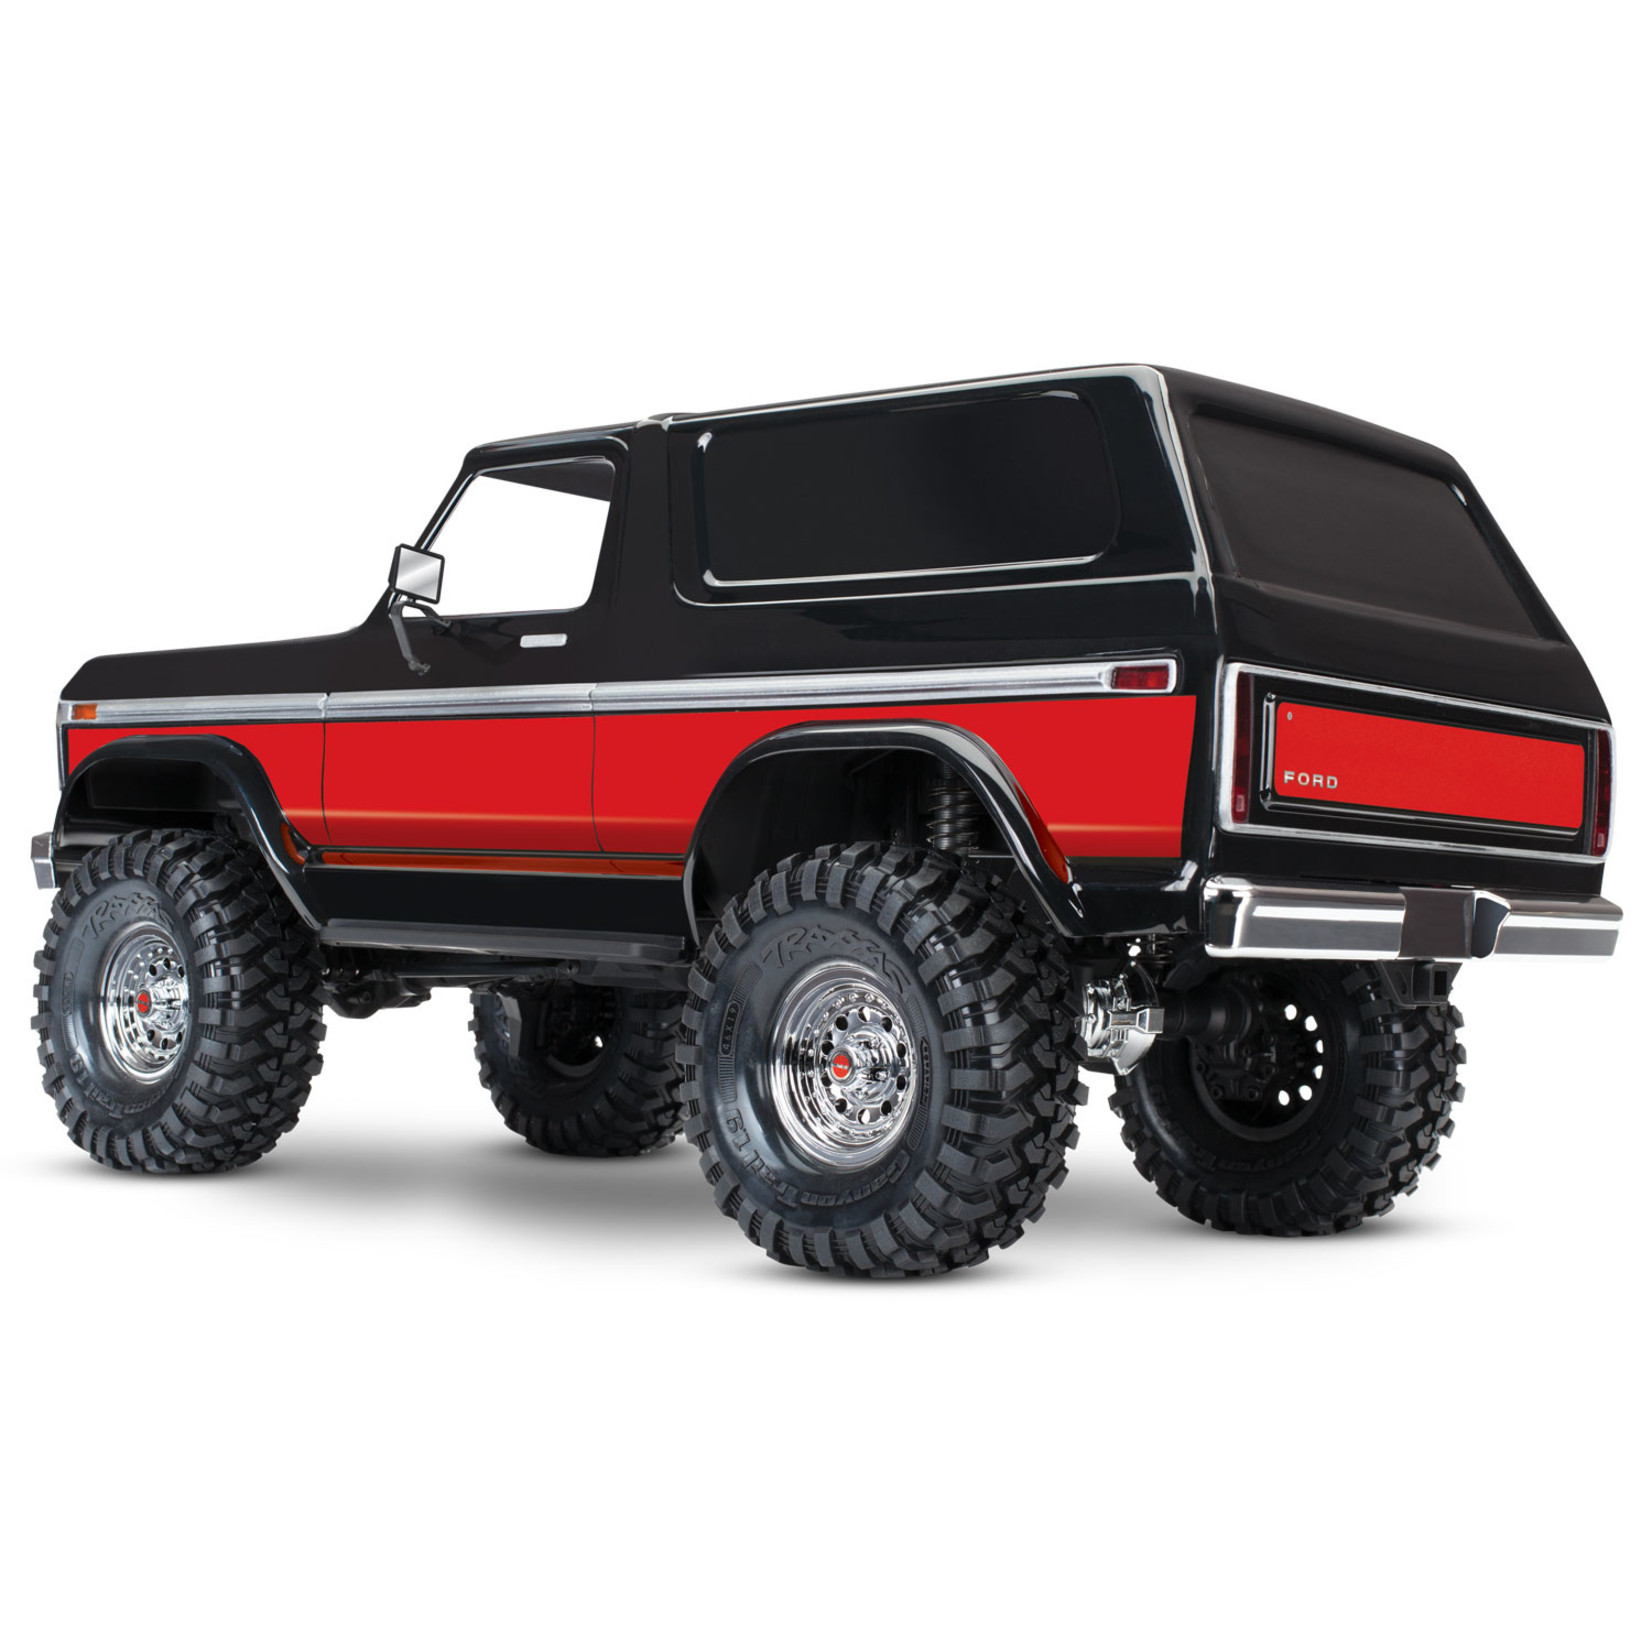 Traxxas TRX-4 Scale and Trail Crawler with 1979 Ford Bronco Body: 1/10 Scale 4WD Electric Truck